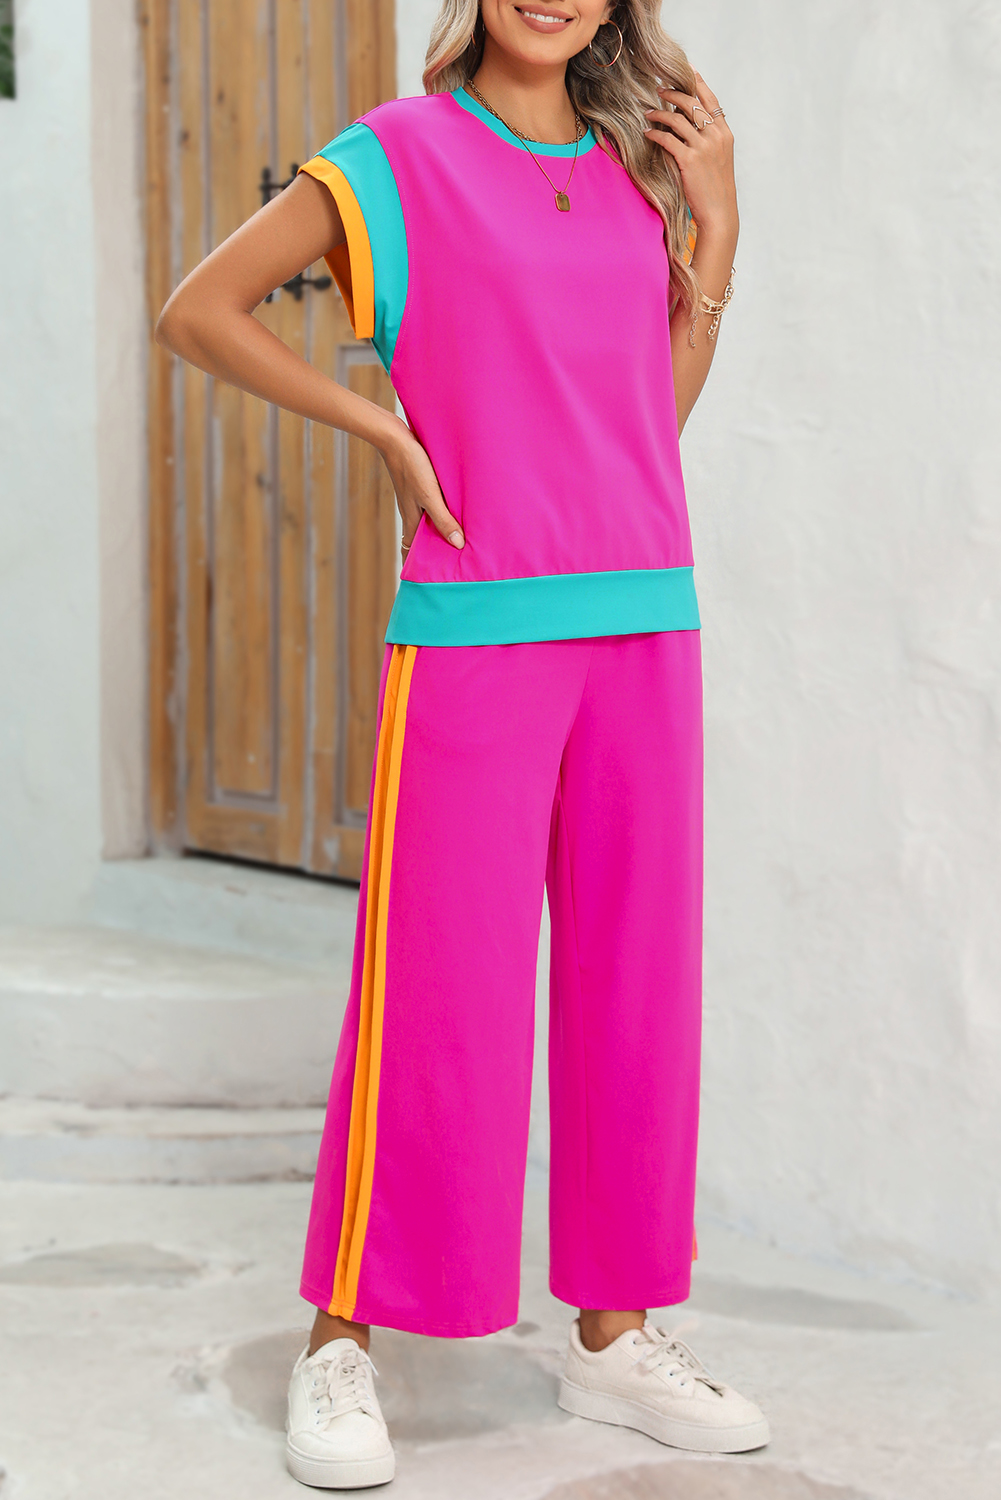 Shewin Wholesale Dropshipping Strawberry Pink Colorblock Cap Sleeve Tee and Wide Leg PANTS Set